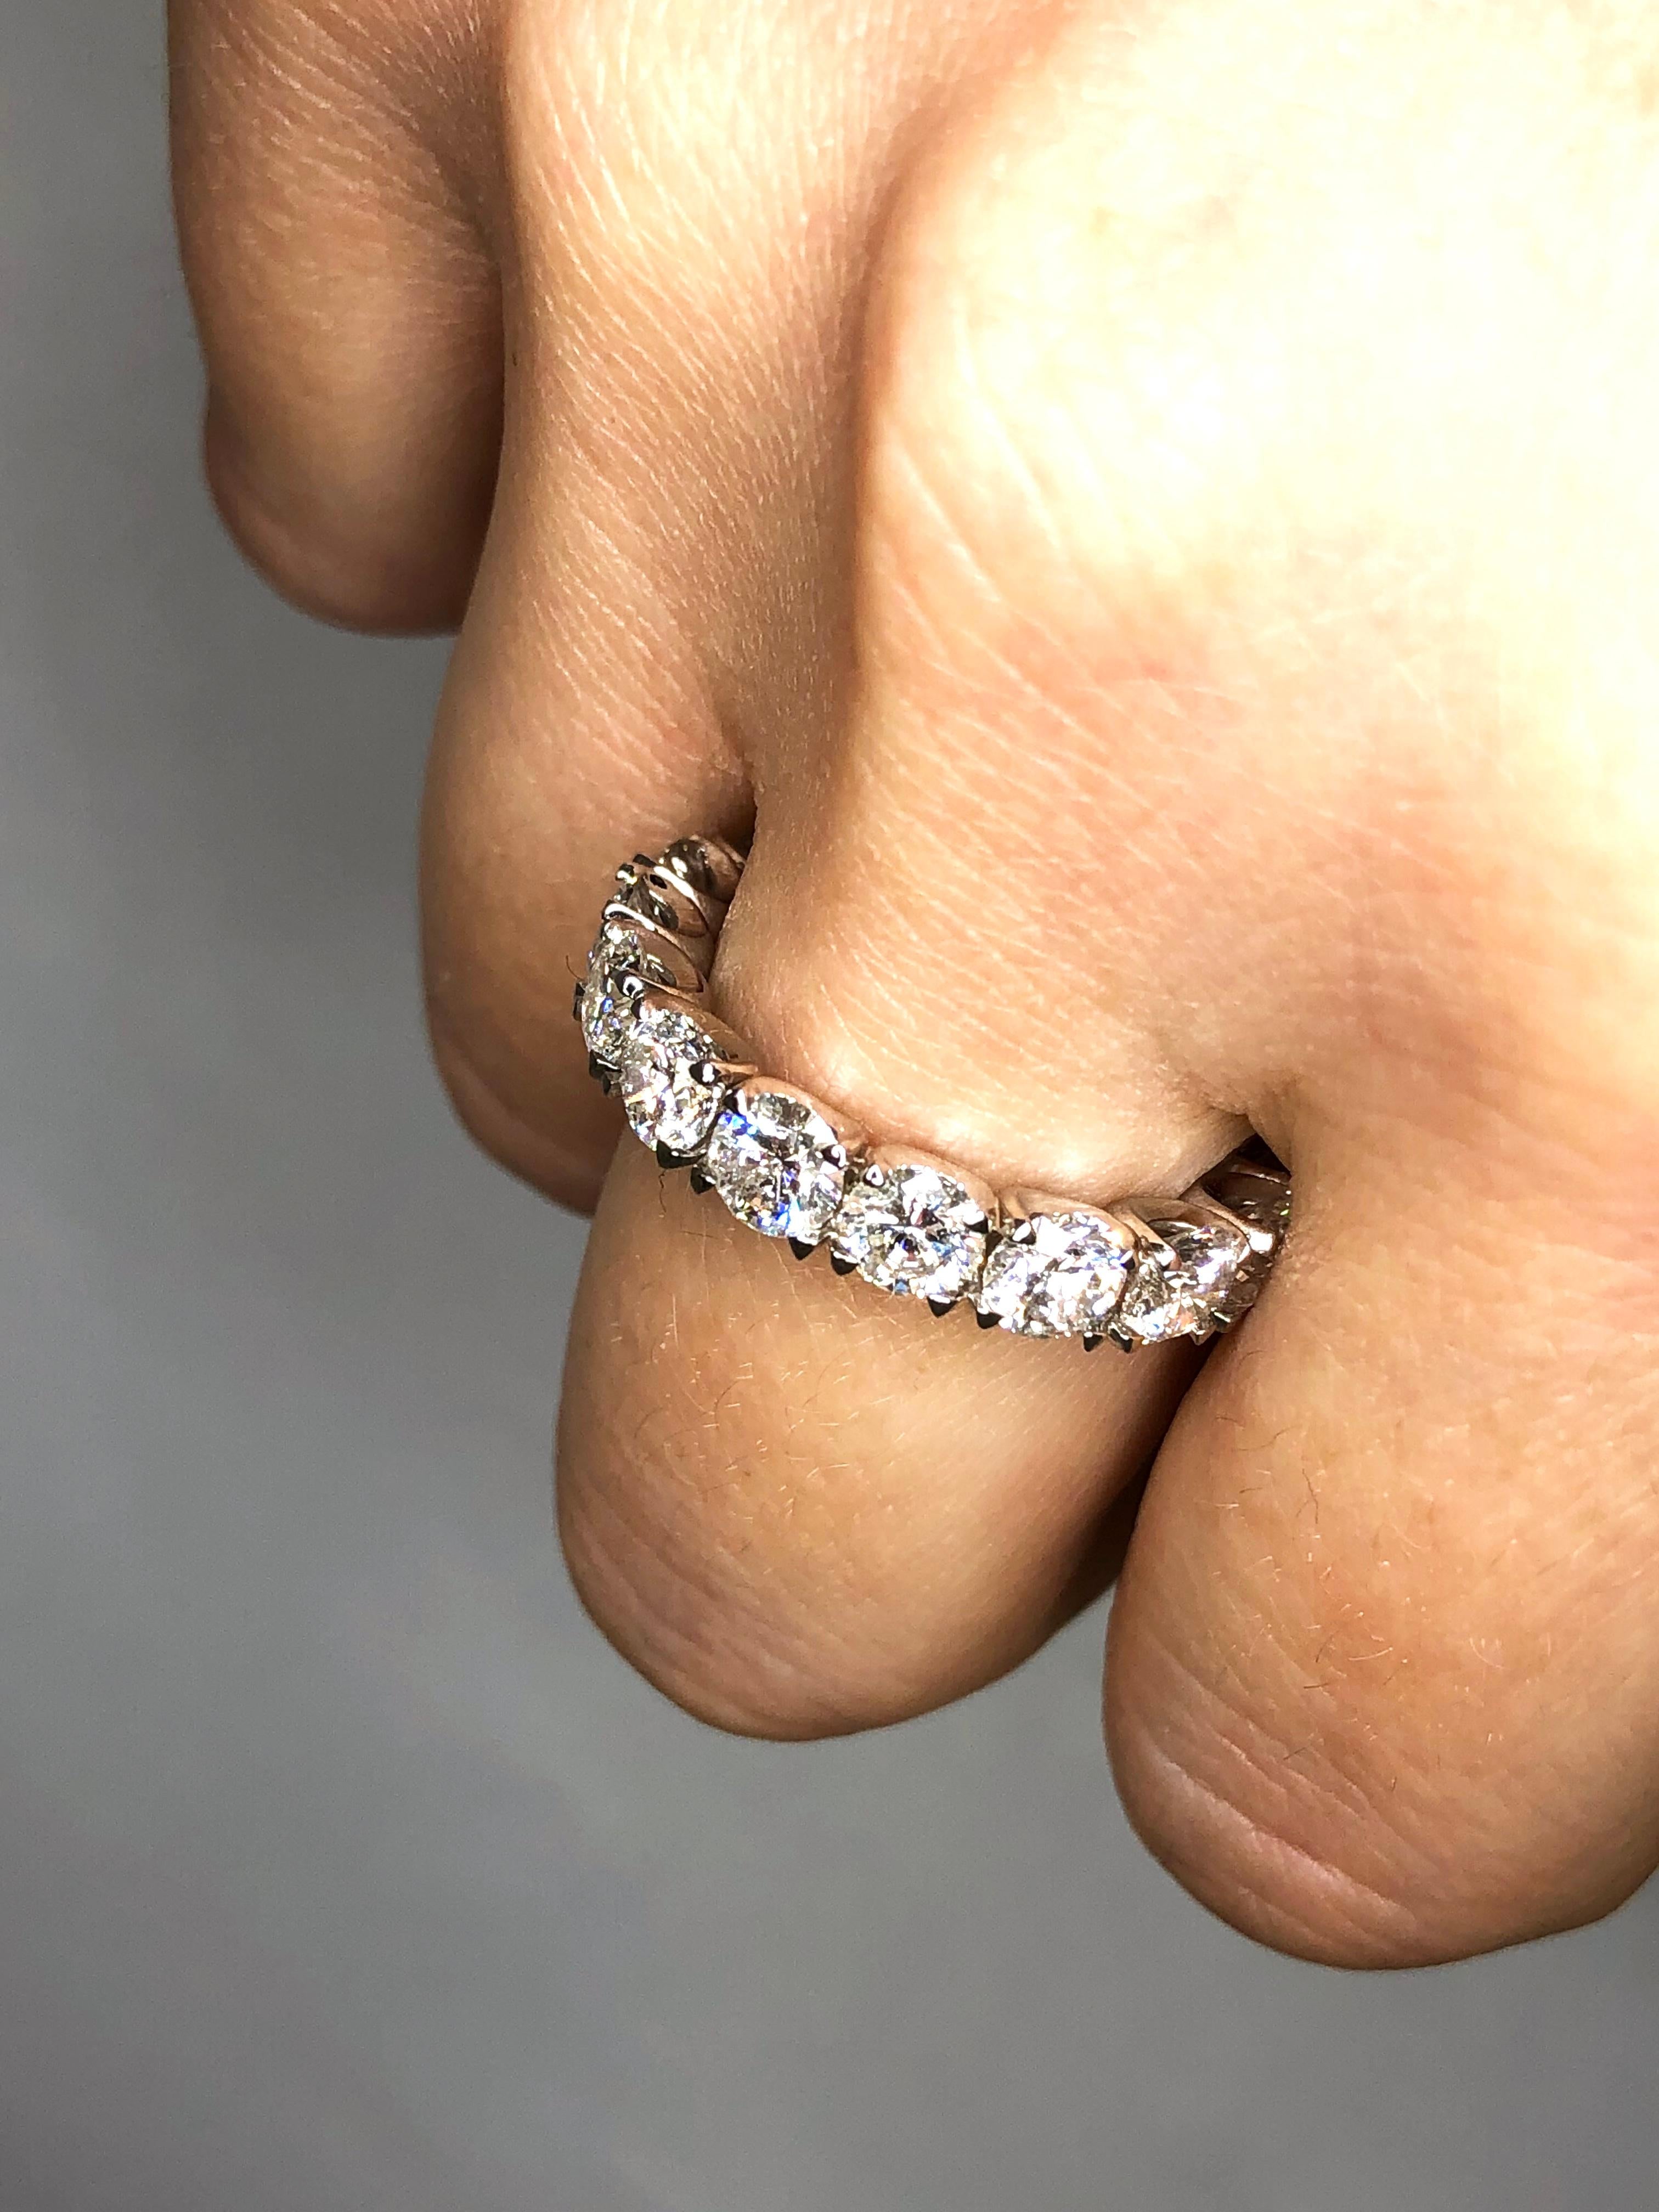 Diamond Eternity Band set in 14K White gold. Round Brilliant diamonds are F-G VS2-SI1 . Carat weight = 4.28ct. Total ring weight 3.75 grams. 
Ring size 6. Can be sized upon request. This ring is customizable, price may vary depending on